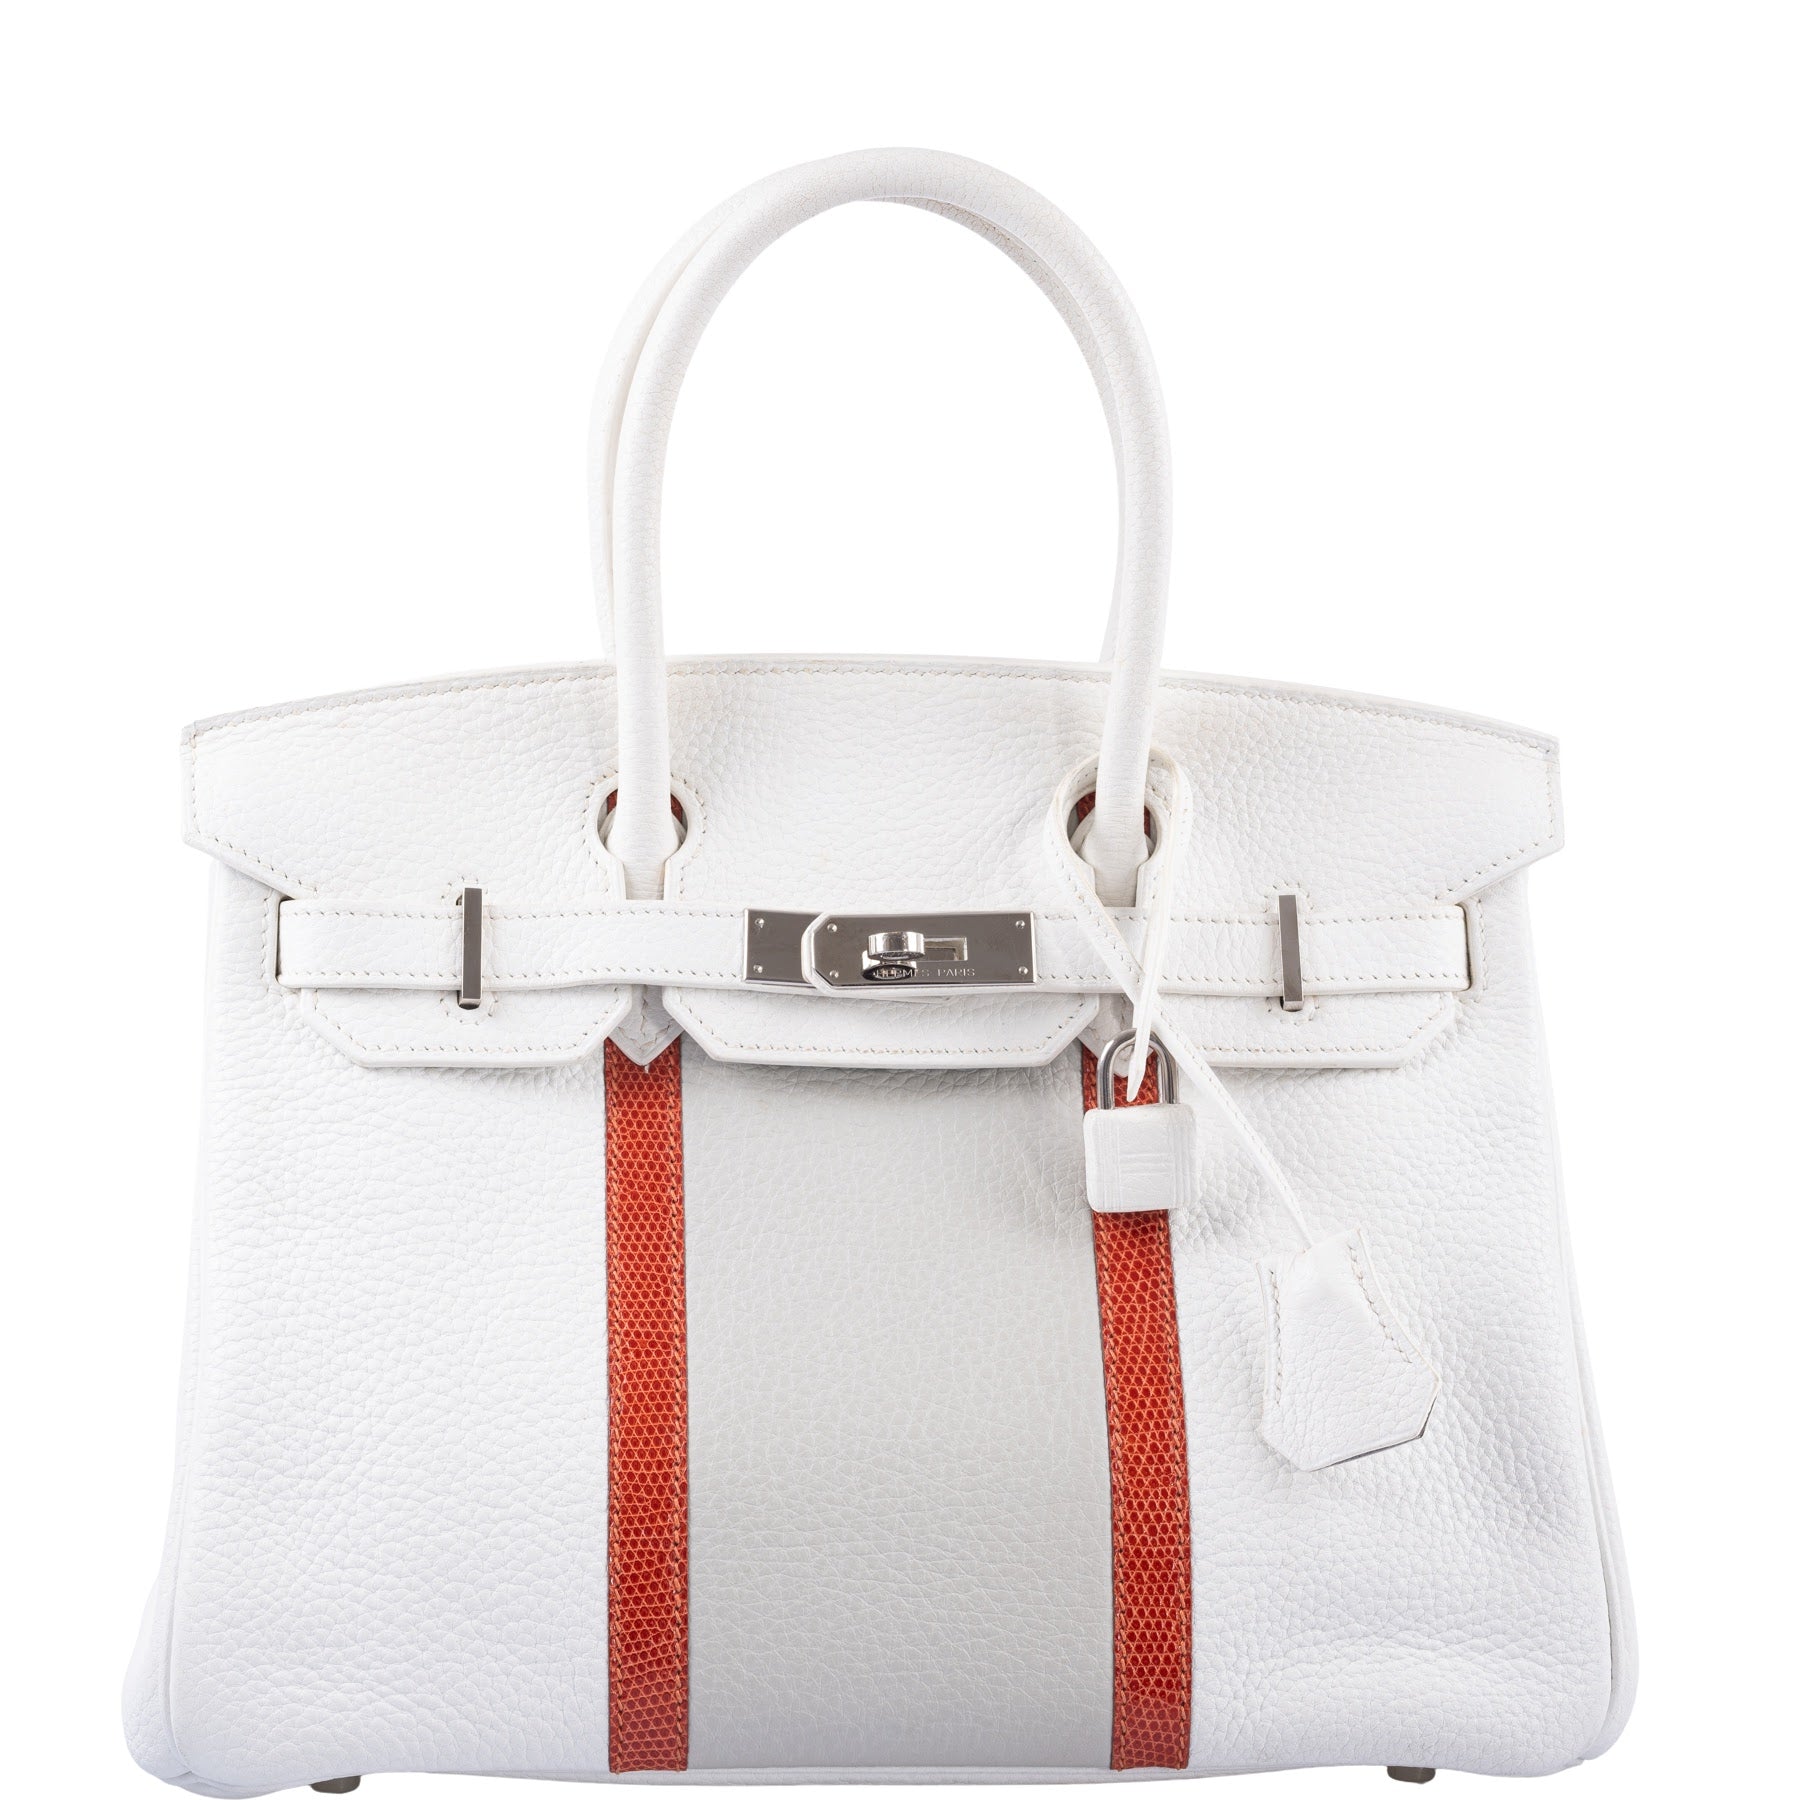 Hermes Birkin 30 Bag White Clemence Leather with Gold Hardware